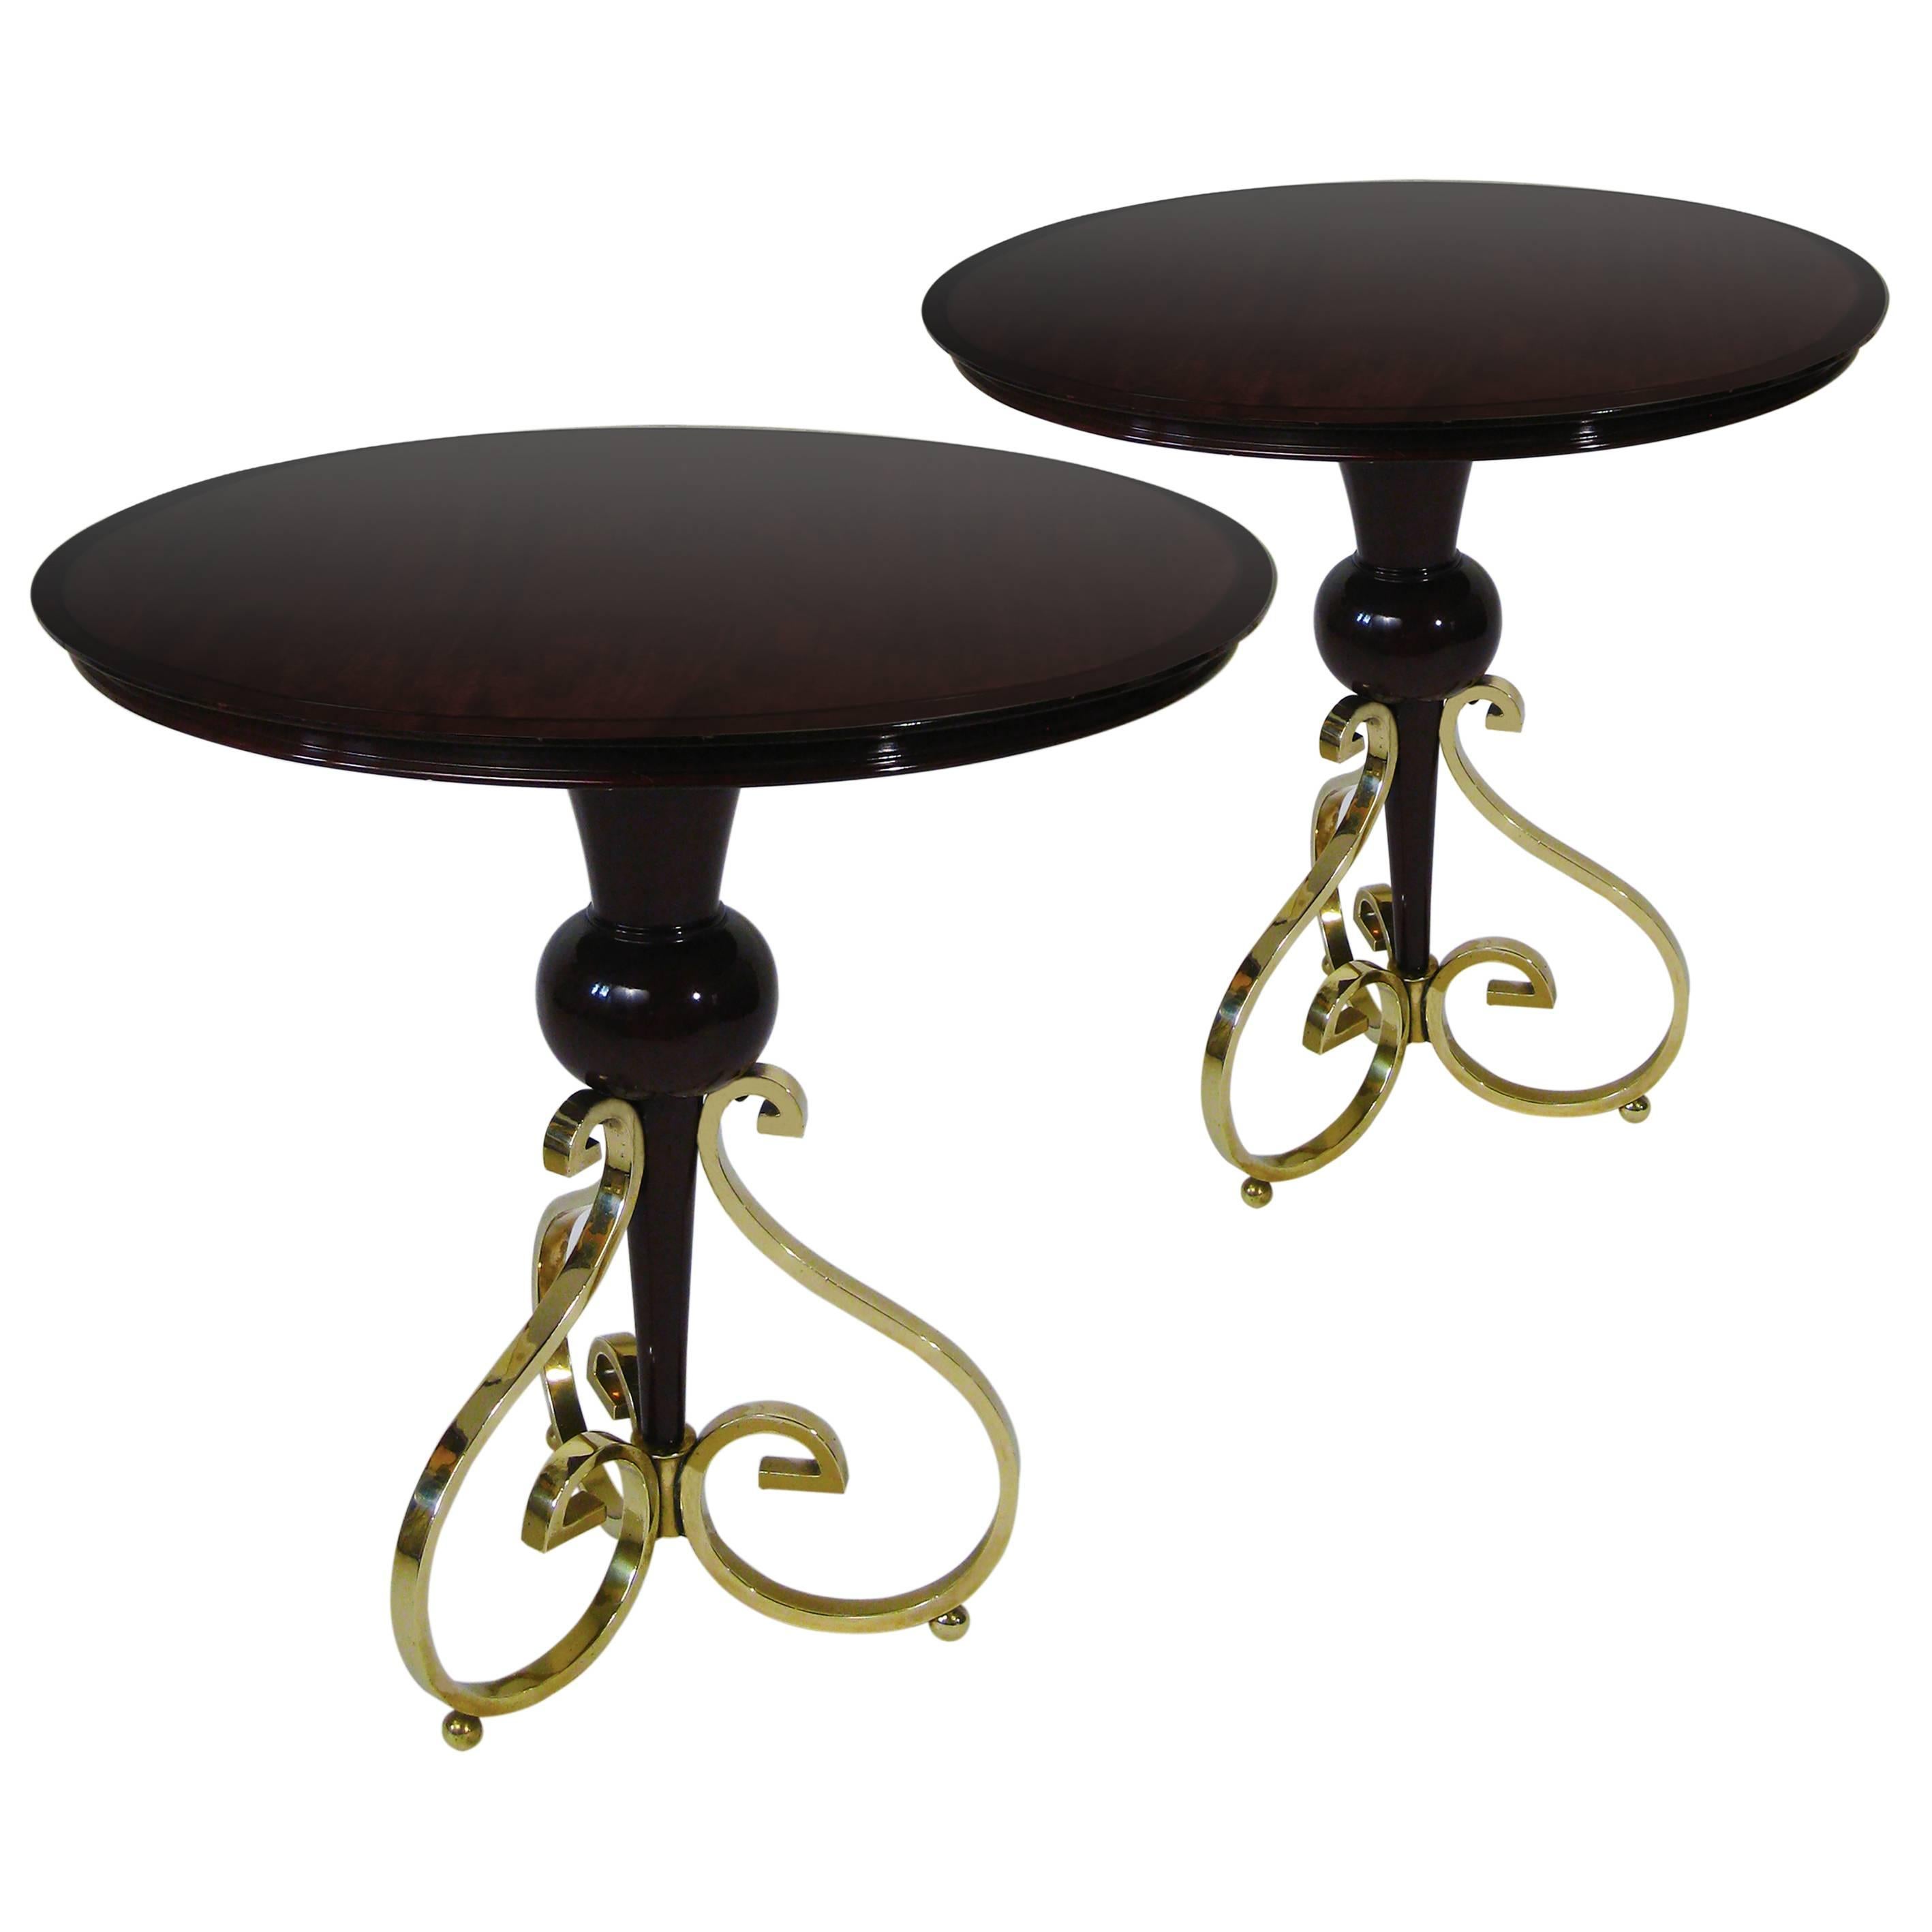 Pair of Side Tables, Mahogany and Bronze, Arturo Pani, Mexico, circa 1950 For Sale